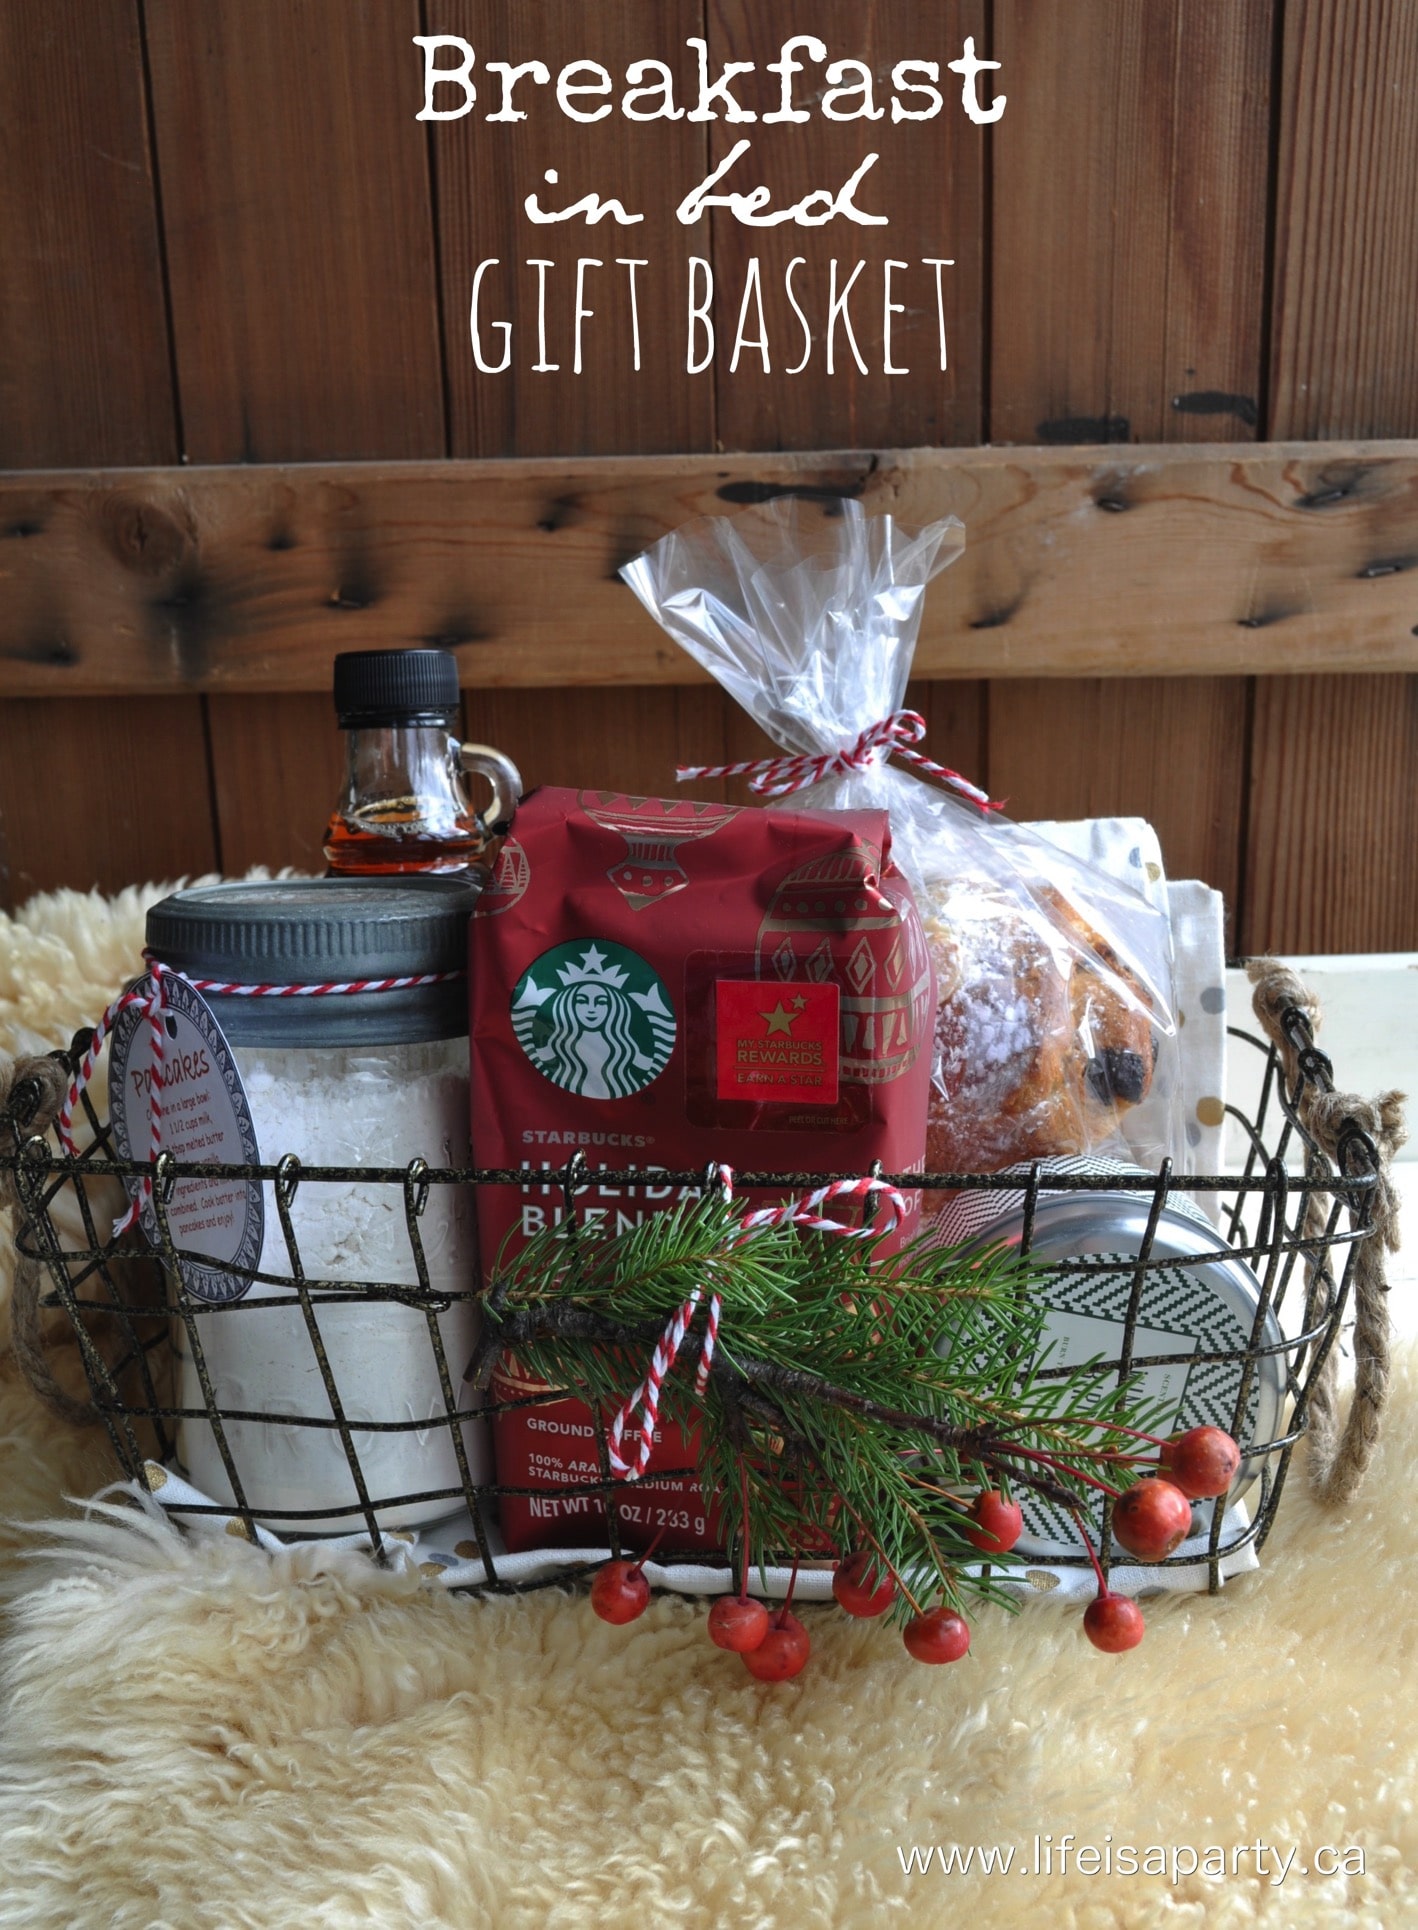 Breakfast in Bed Gift Basket: perfect, thoughtful gift, includes a recipe and homemade mix for pancakes, and free printable.